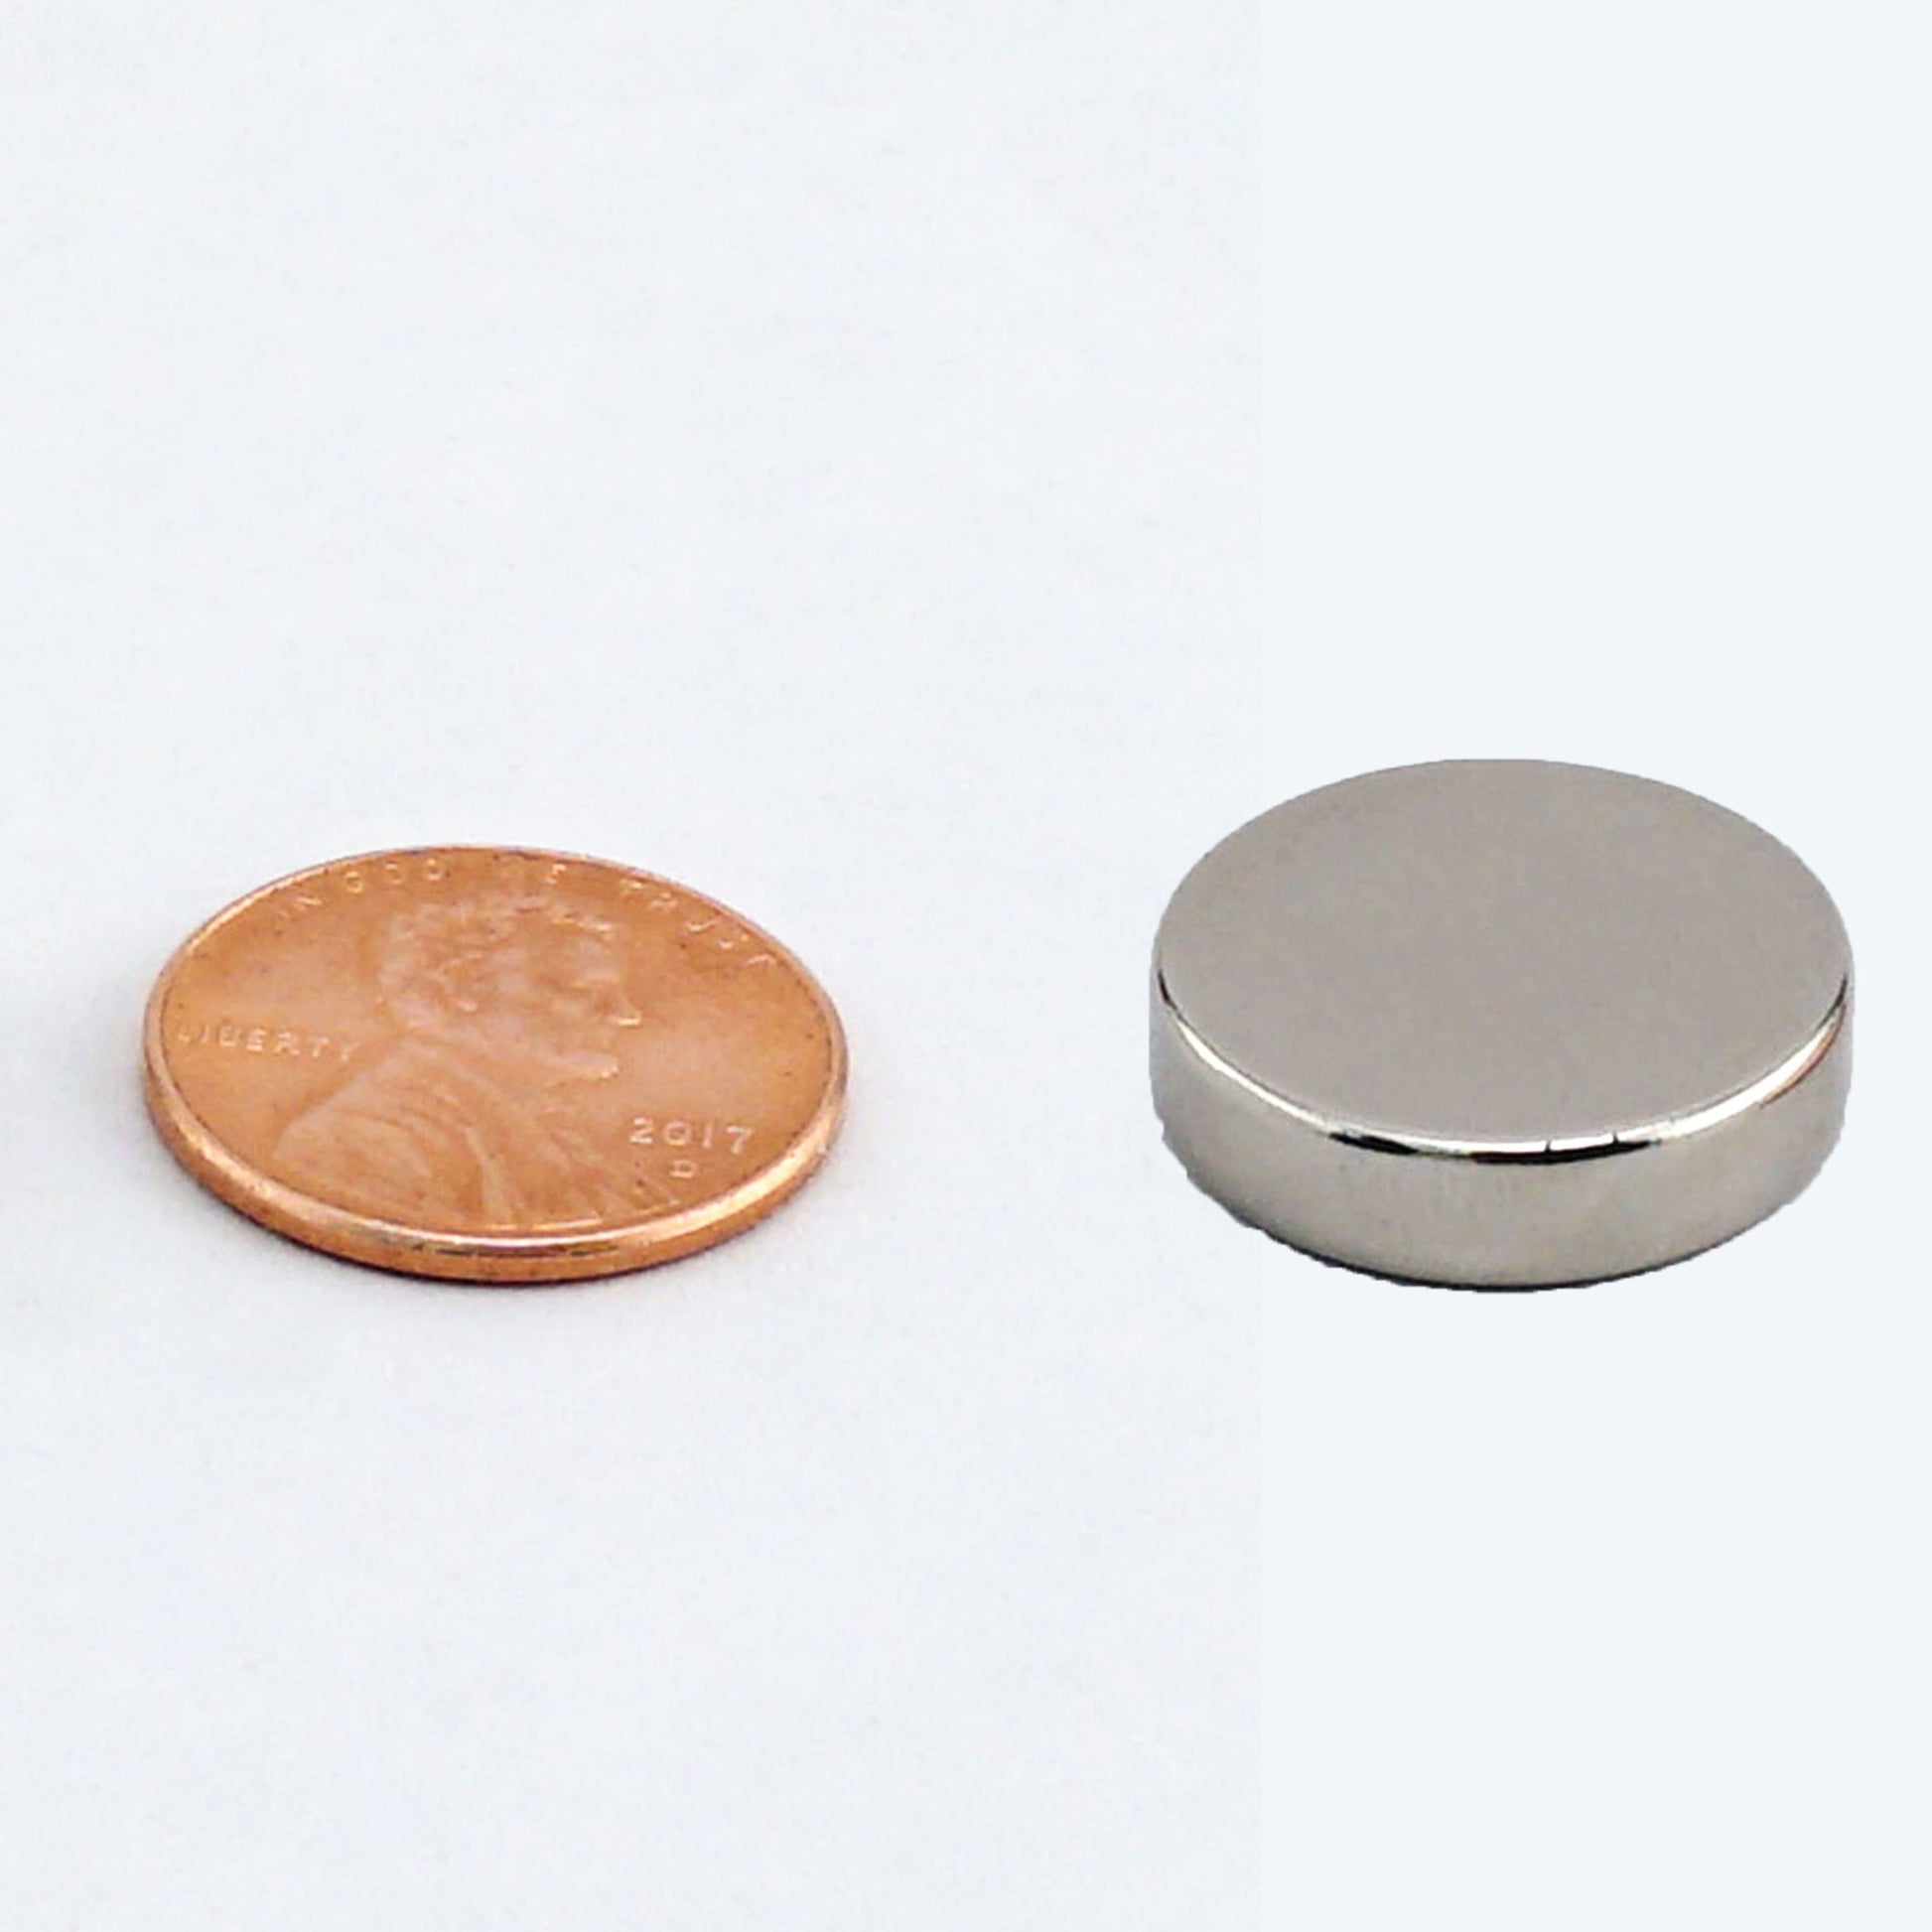 Load image into Gallery viewer, ND45-8706N Neodymium Disc Magnet - Compared to Penny for Size Reference